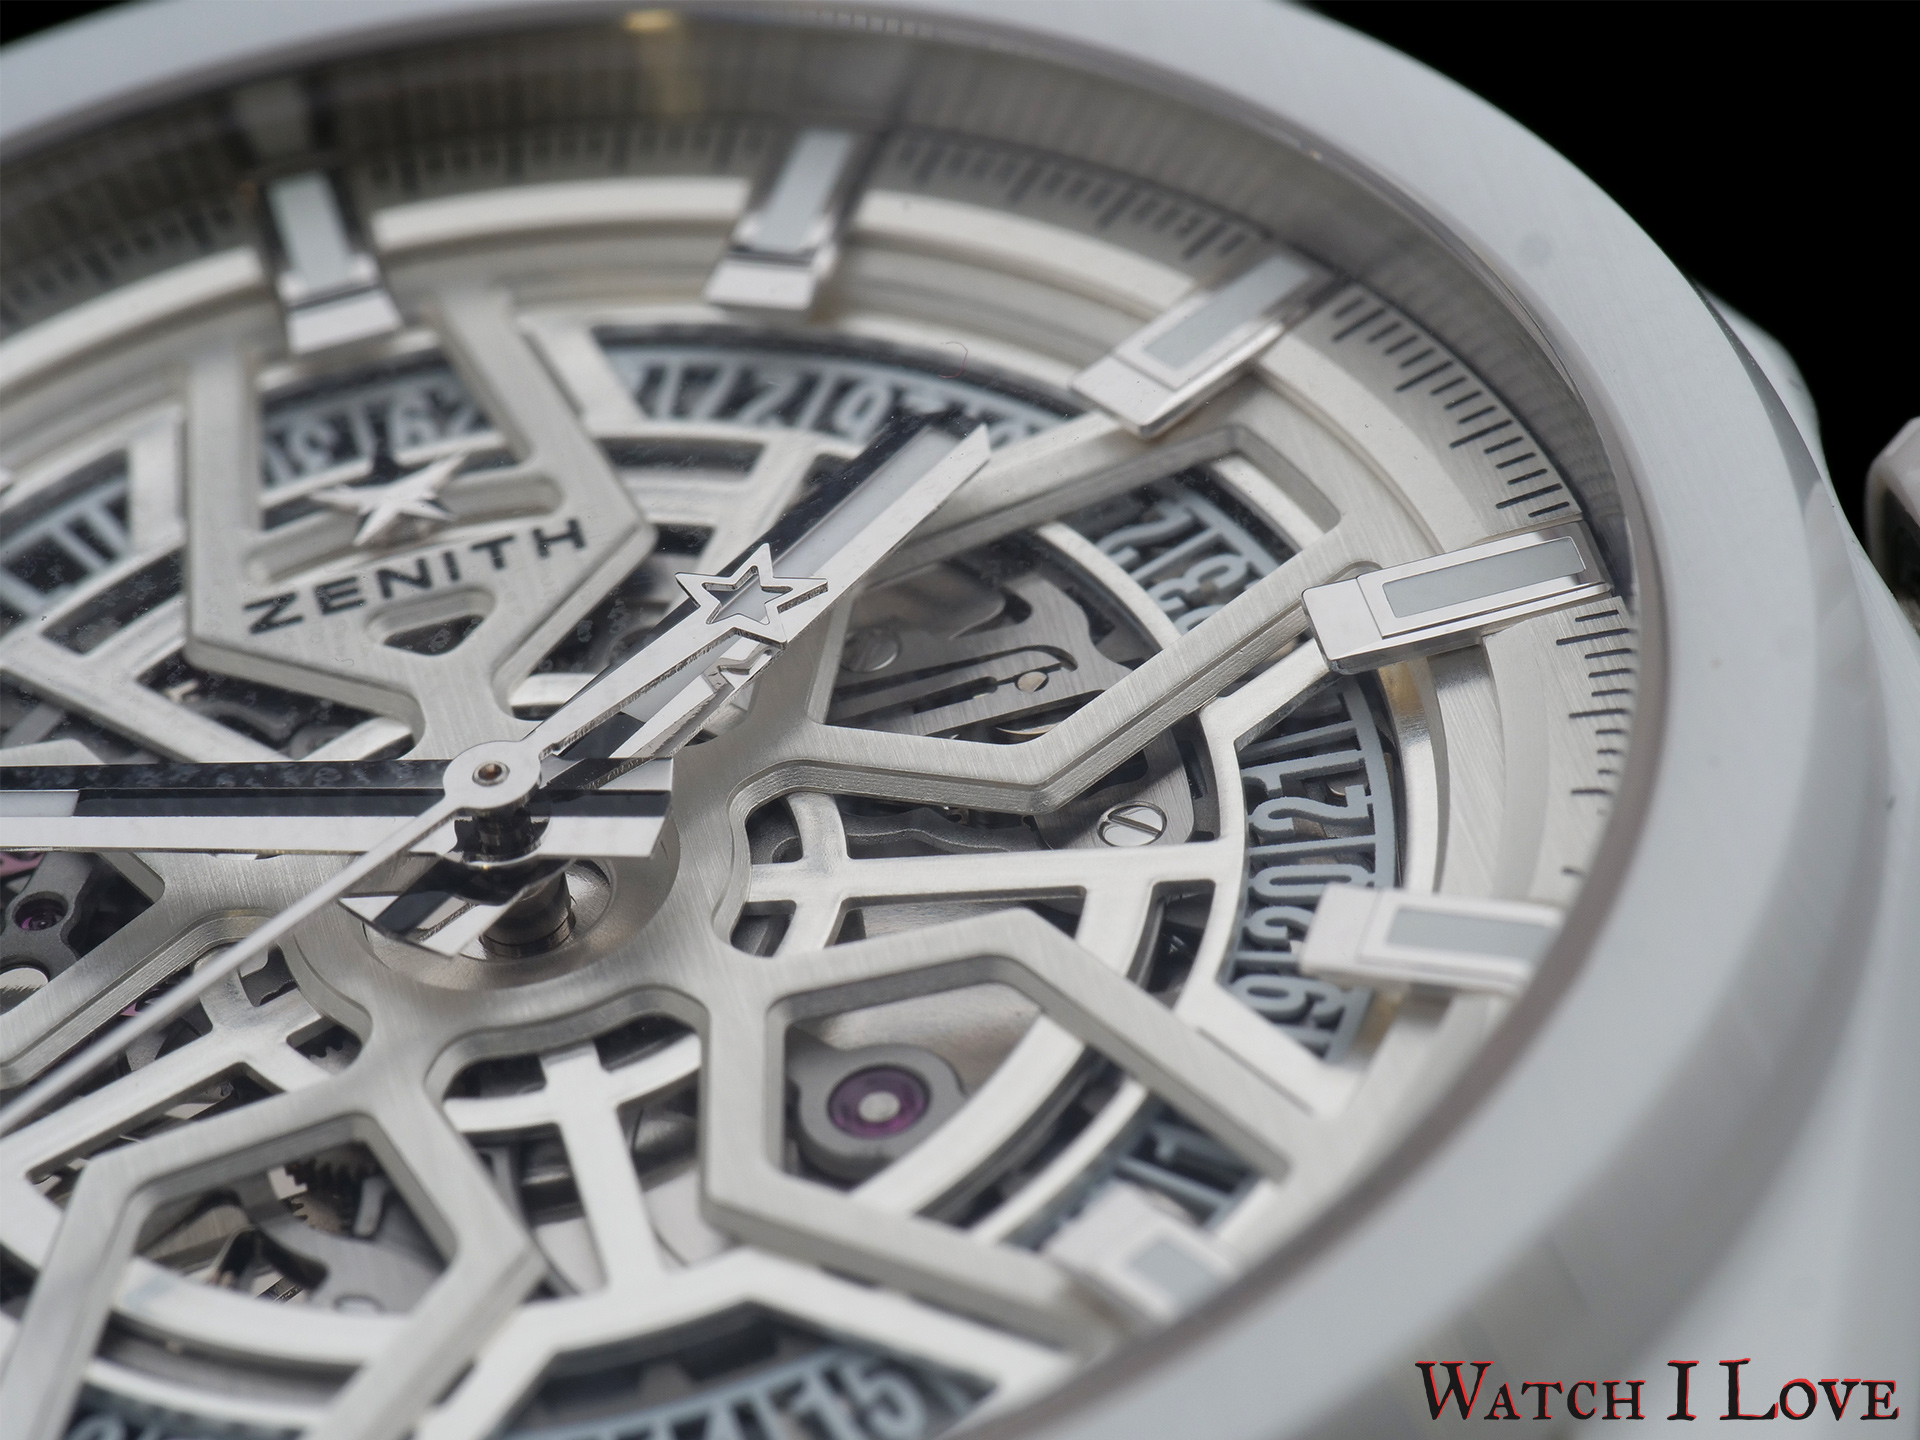 Zenith] Defy Classic in White Ceramic - a palate cleanser : r/Watches